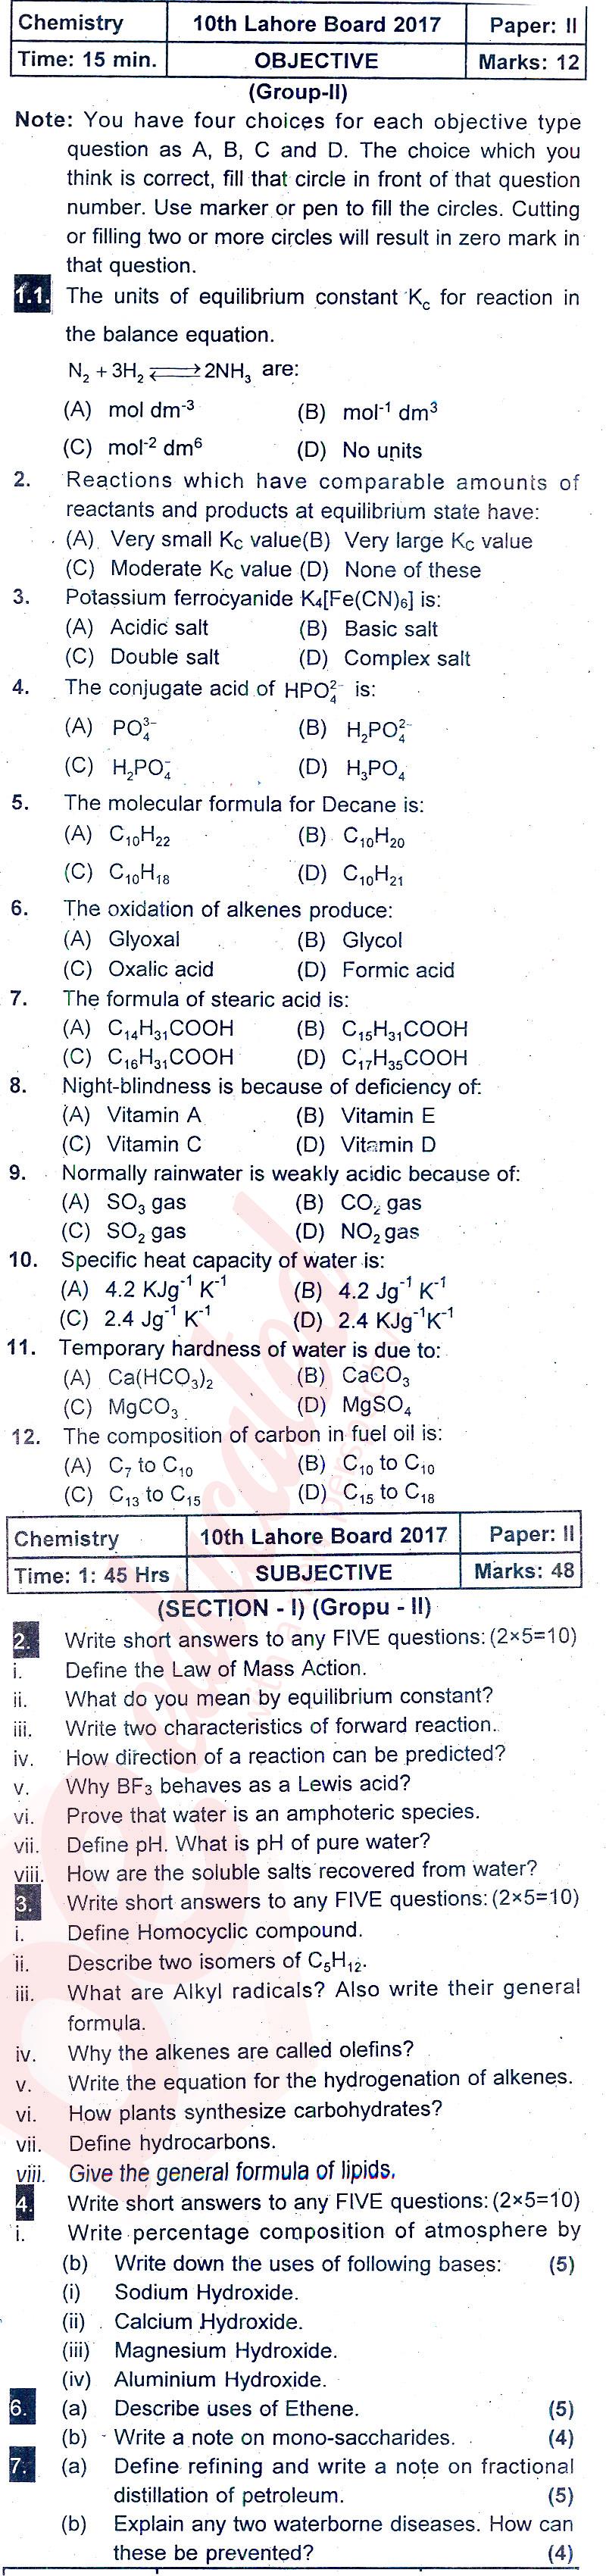 Chemistry 10th class Past Paper Group 2 BISE Lahore 2017